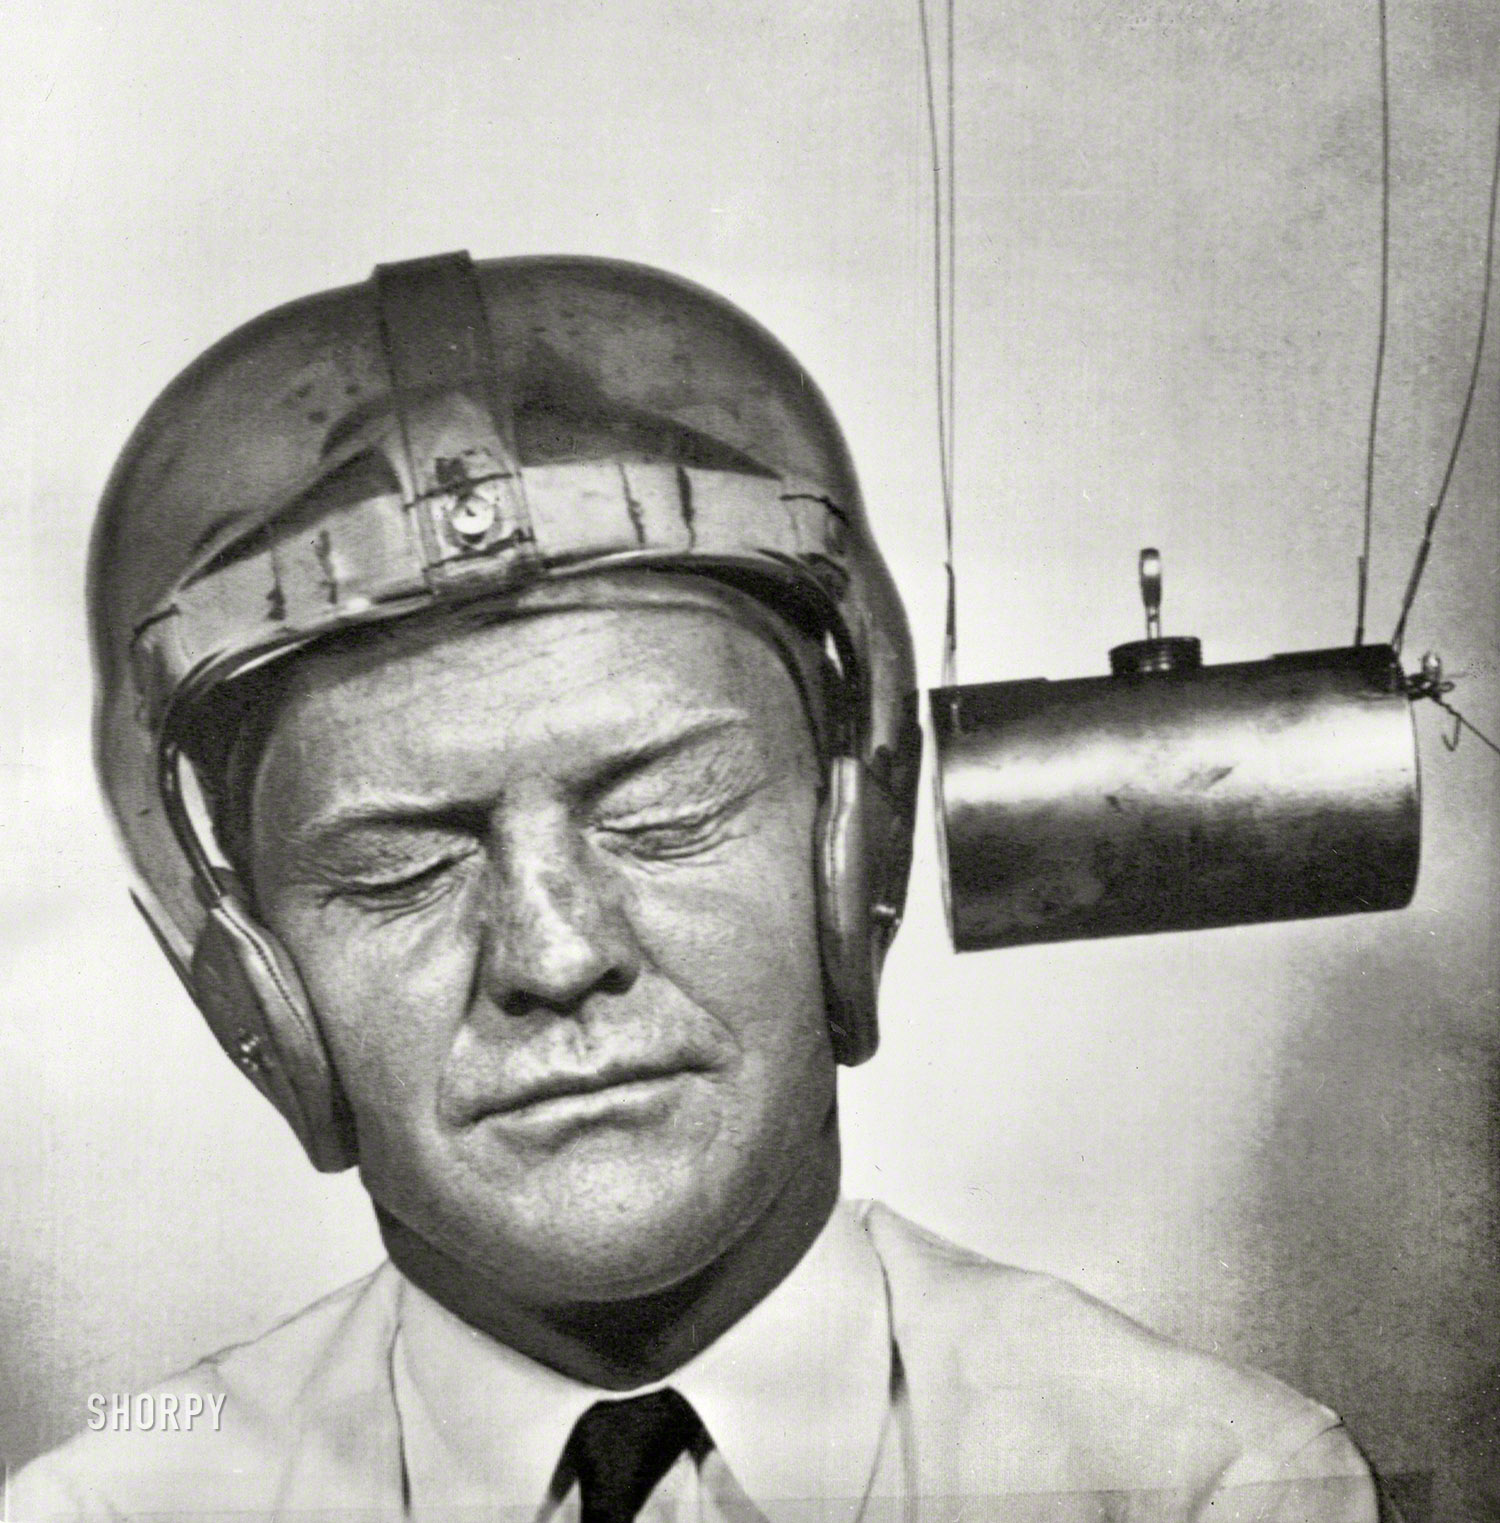 September 13, 1950. "Pendulum pounding into a plastic helmet worn for testing by Dr. Charles F. Lombard, director of the University of Southern California Department of Aviation Physiology. Testing is part of a program being worked out to improve equipment, especially headgear for football players, to cut down fatalities and injuries among gridders." Acme Newsphoto. View full size.